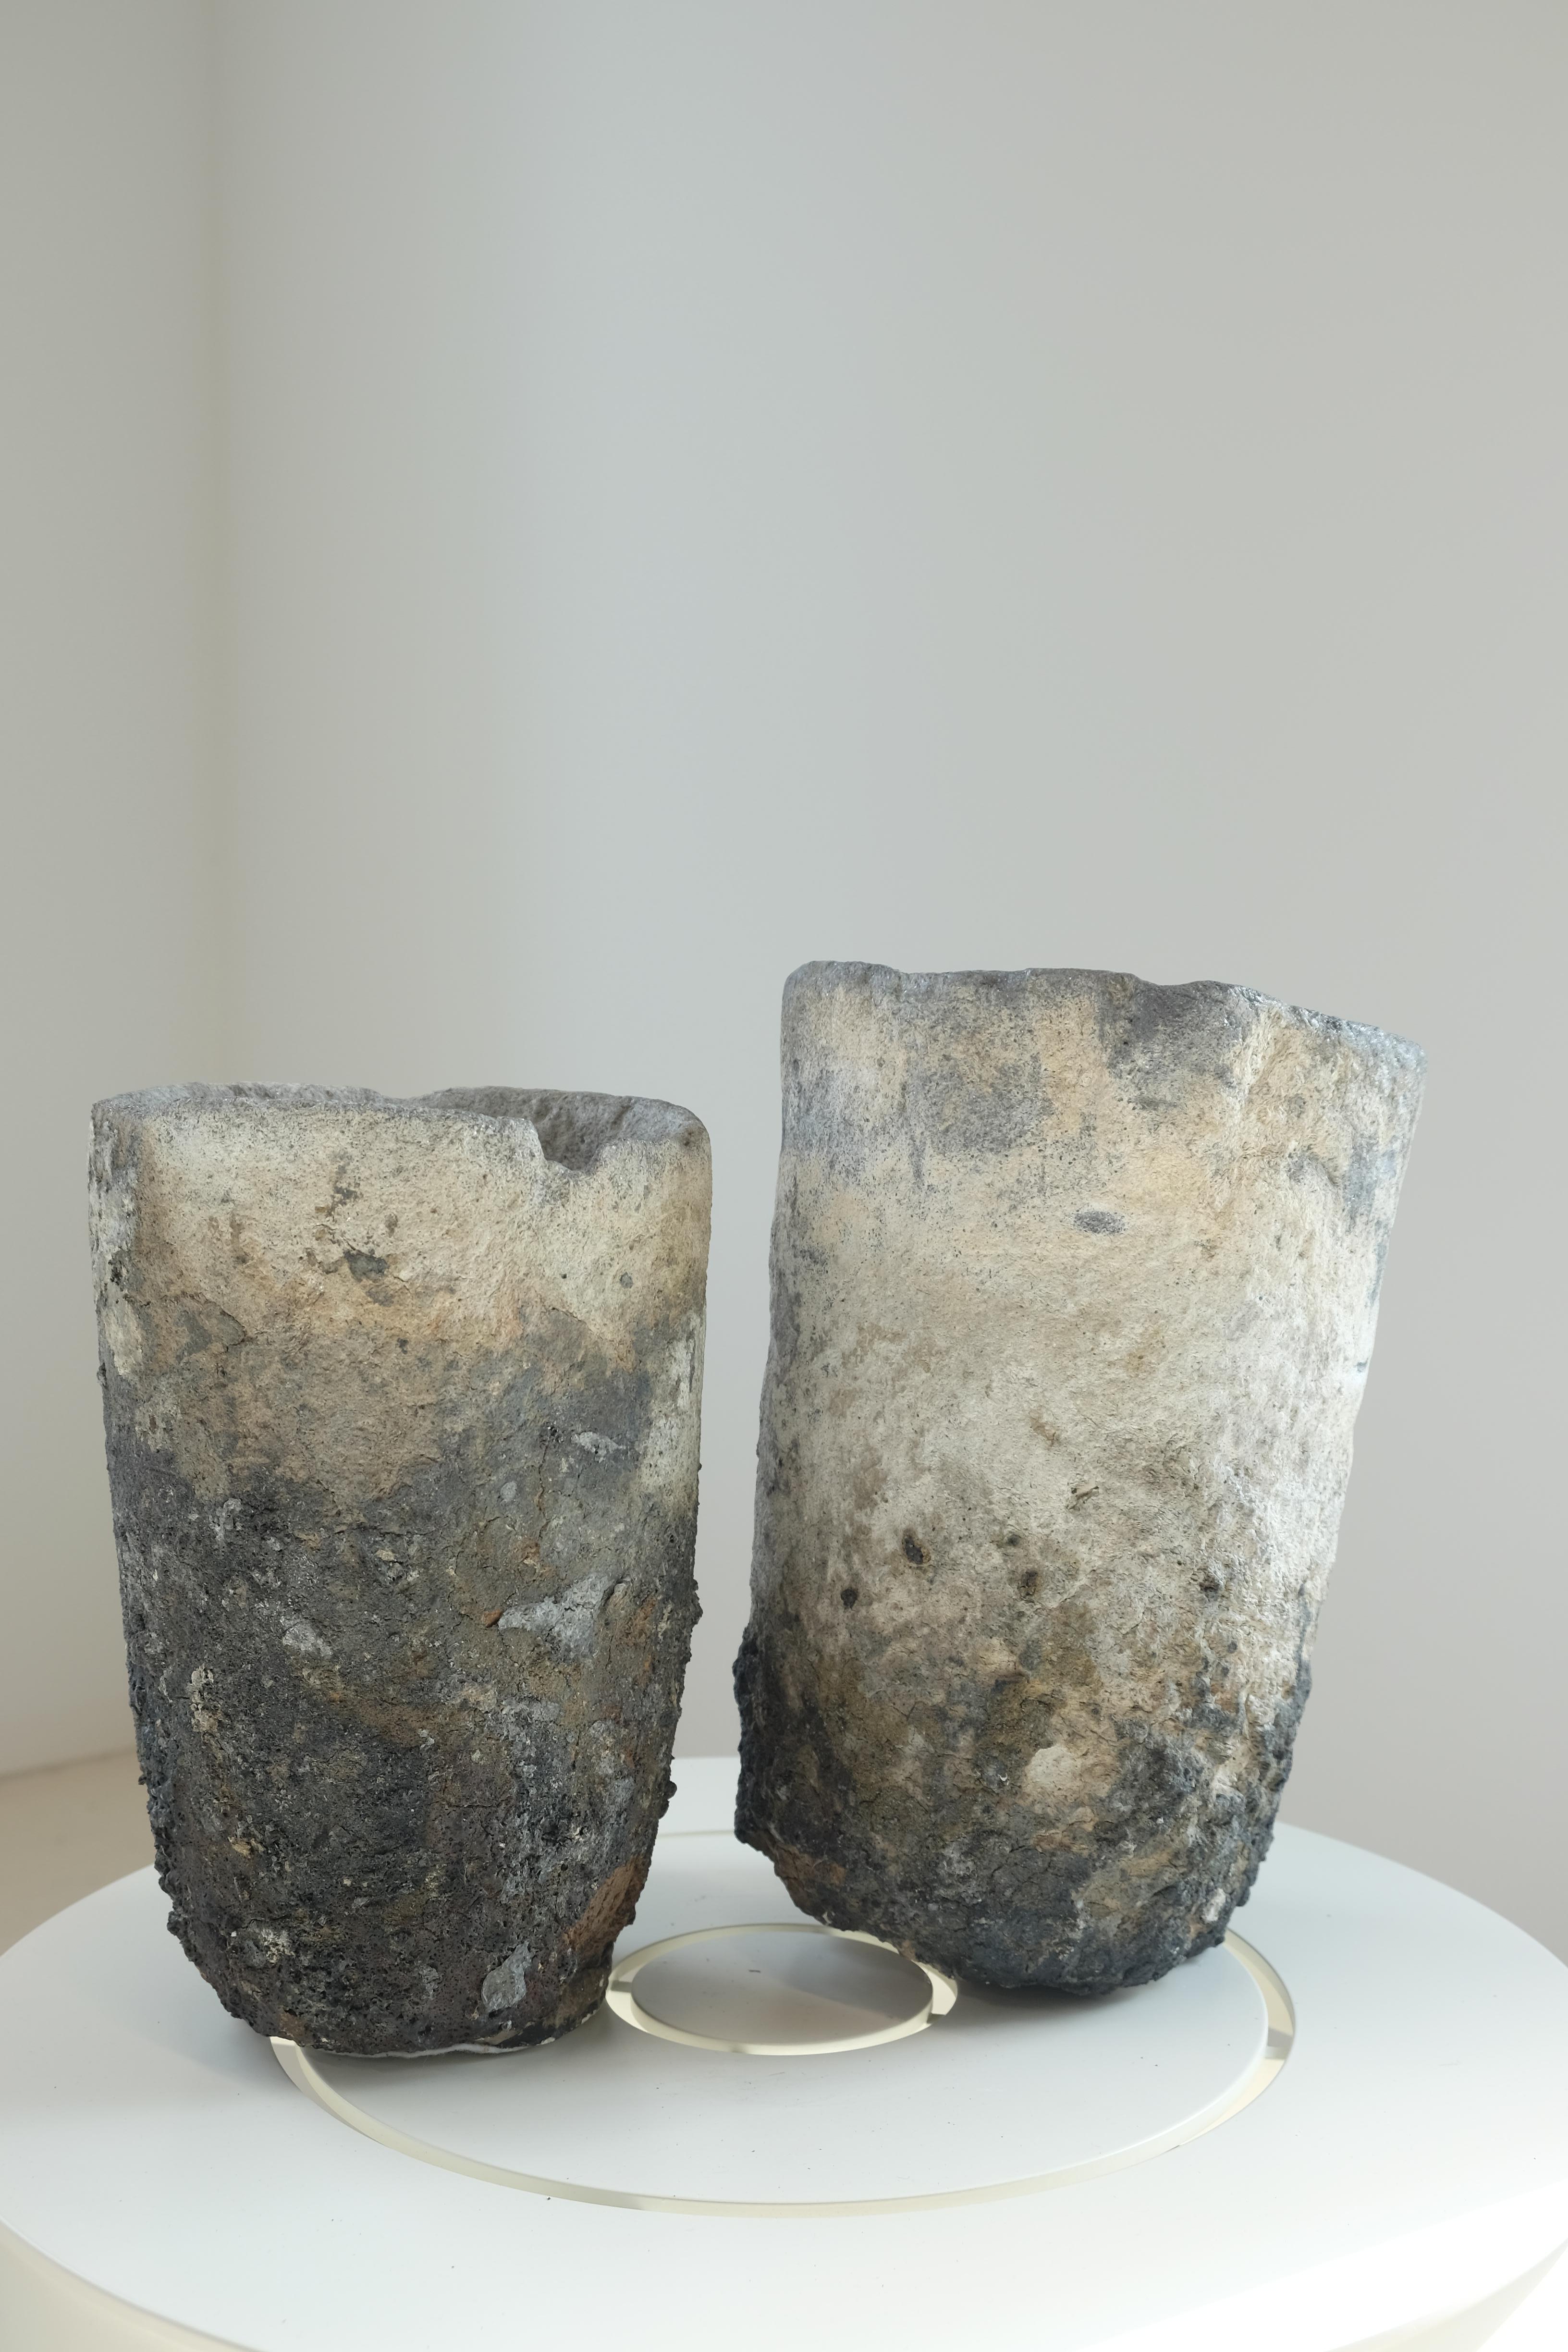 Pair of Lavastone foundry crucibles from France, circa 1900. Measurements: Taller crucible 13